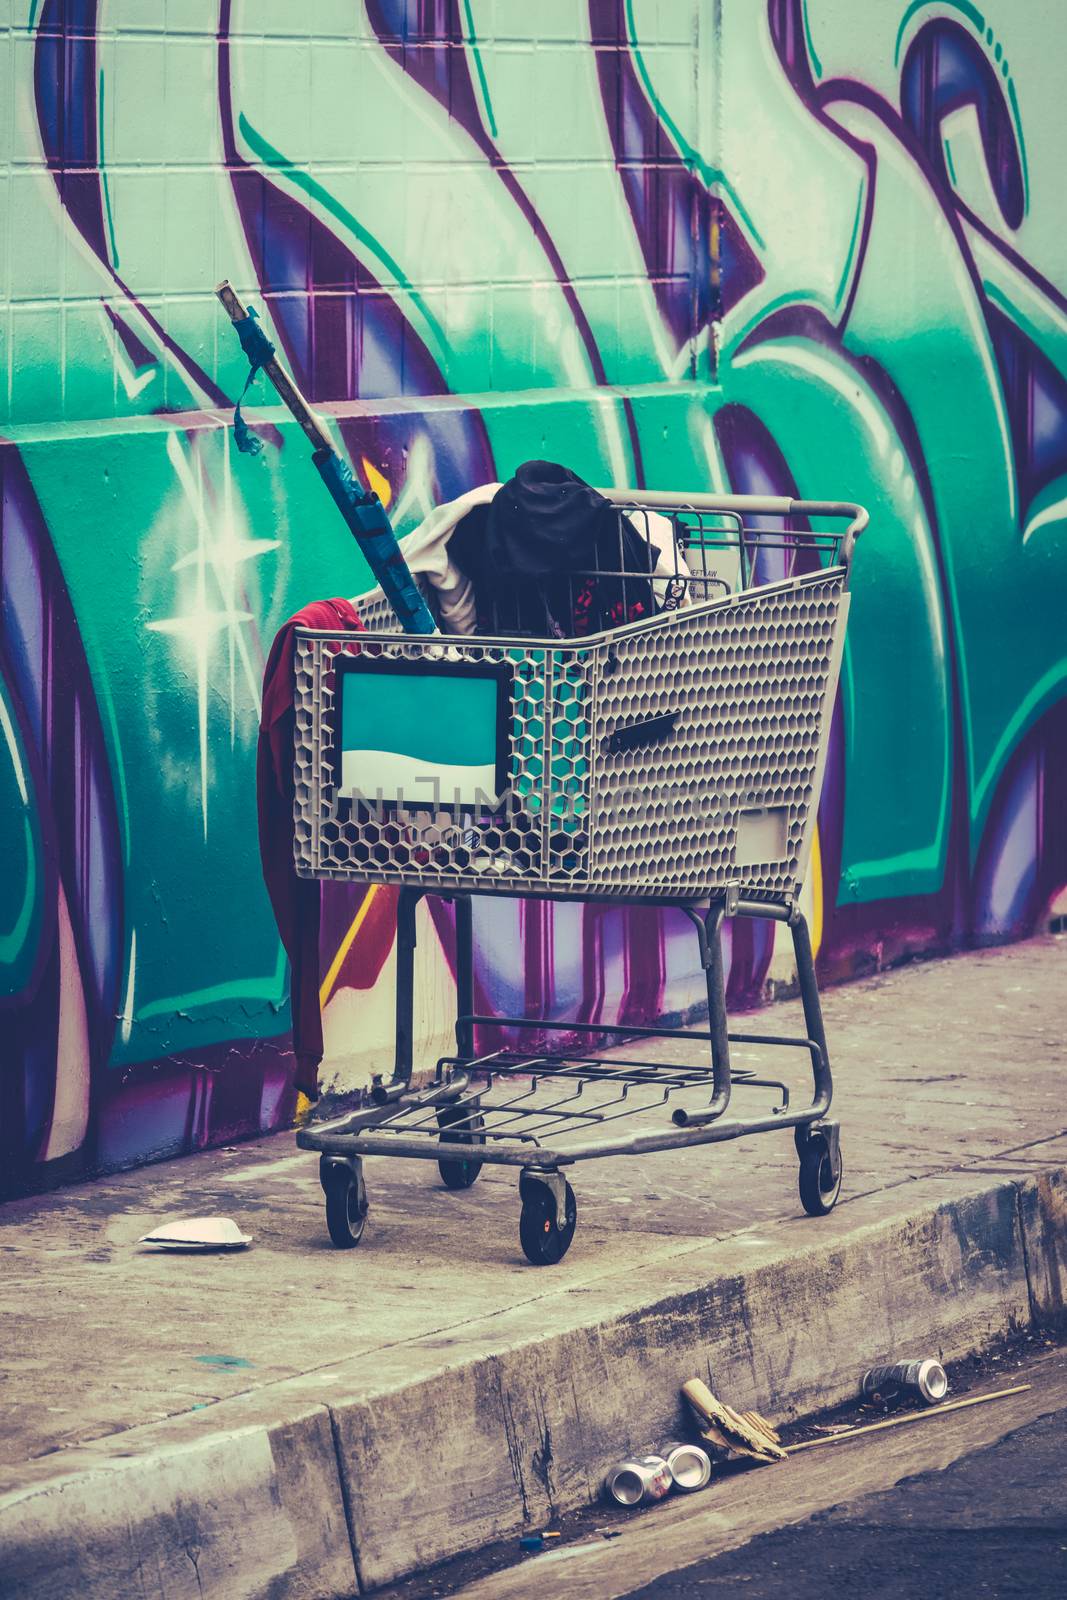 A Shooping Cart Used By A Homeless Person In San Francisco, USA